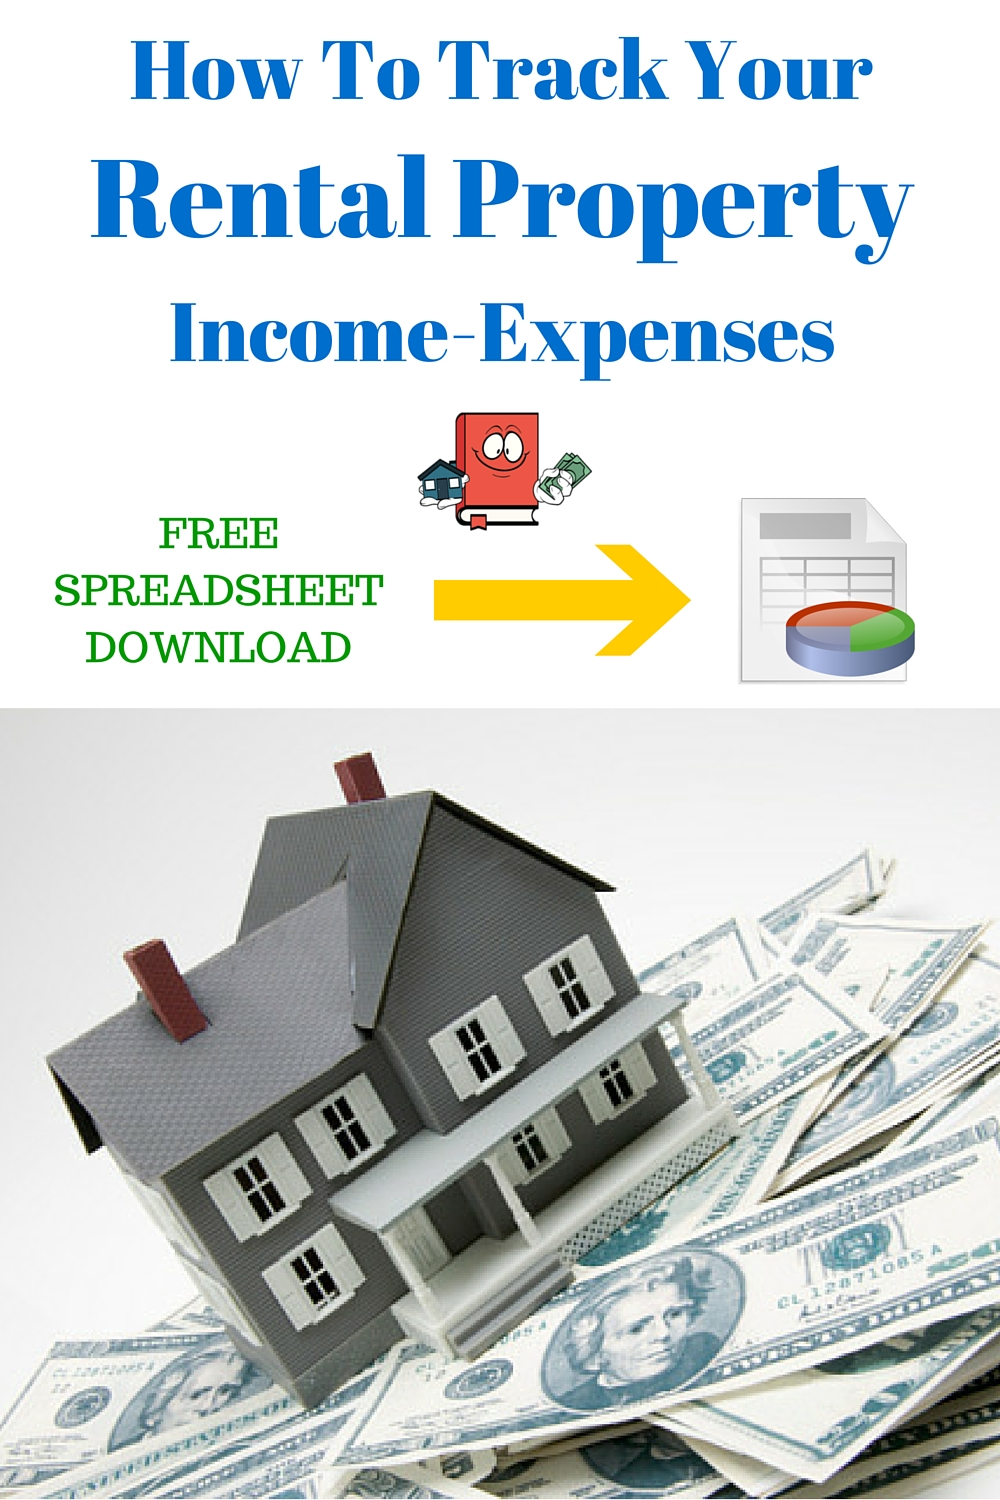 Rental Spreadsheet Free In How To Keep Track Of Rental Property Expenses